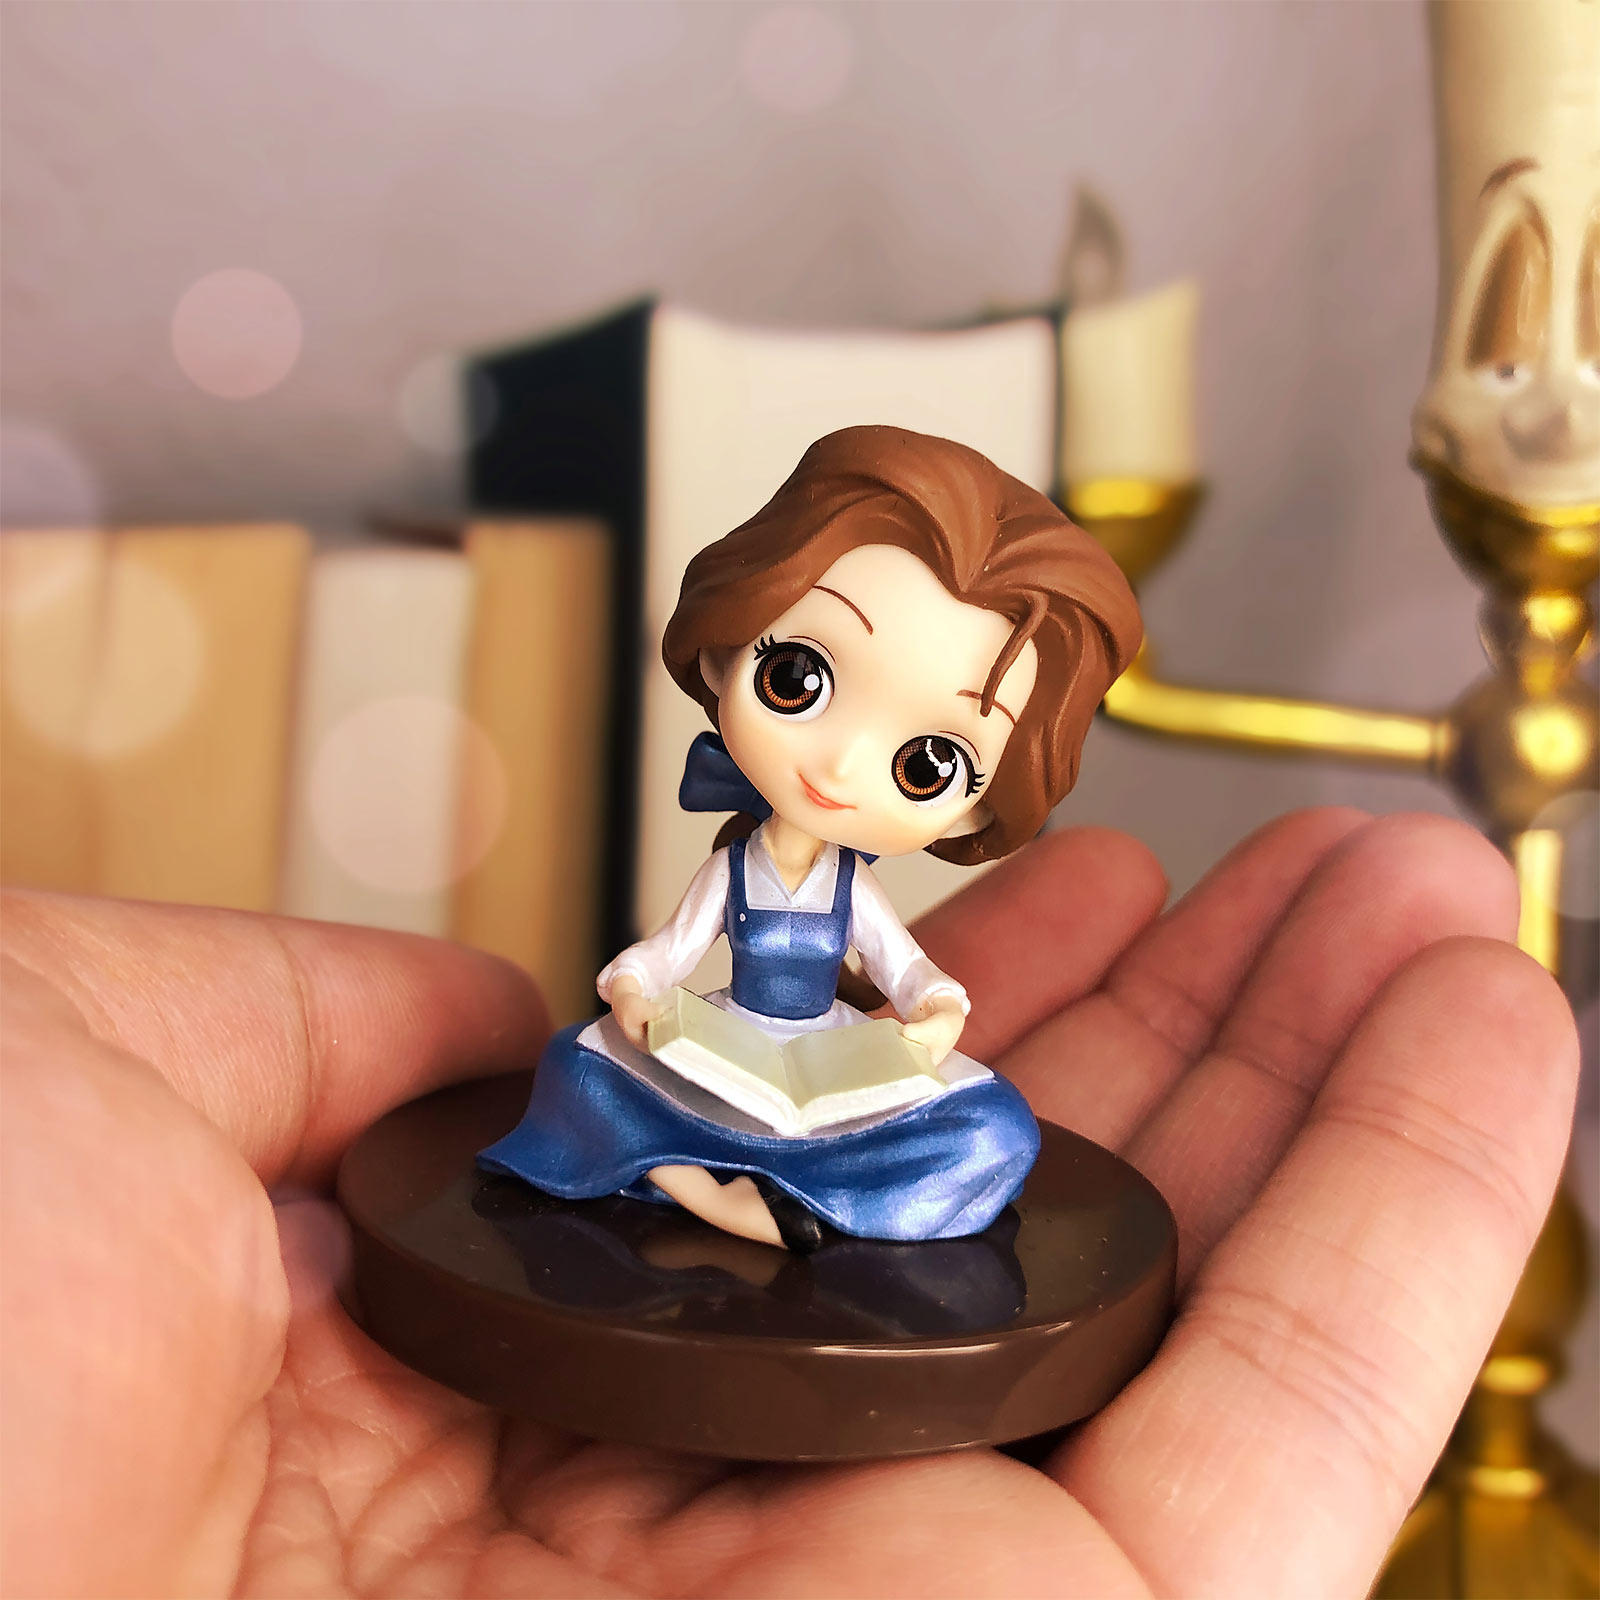 Beauty and the Beast - Belle Q Posket Figuur 5 cm